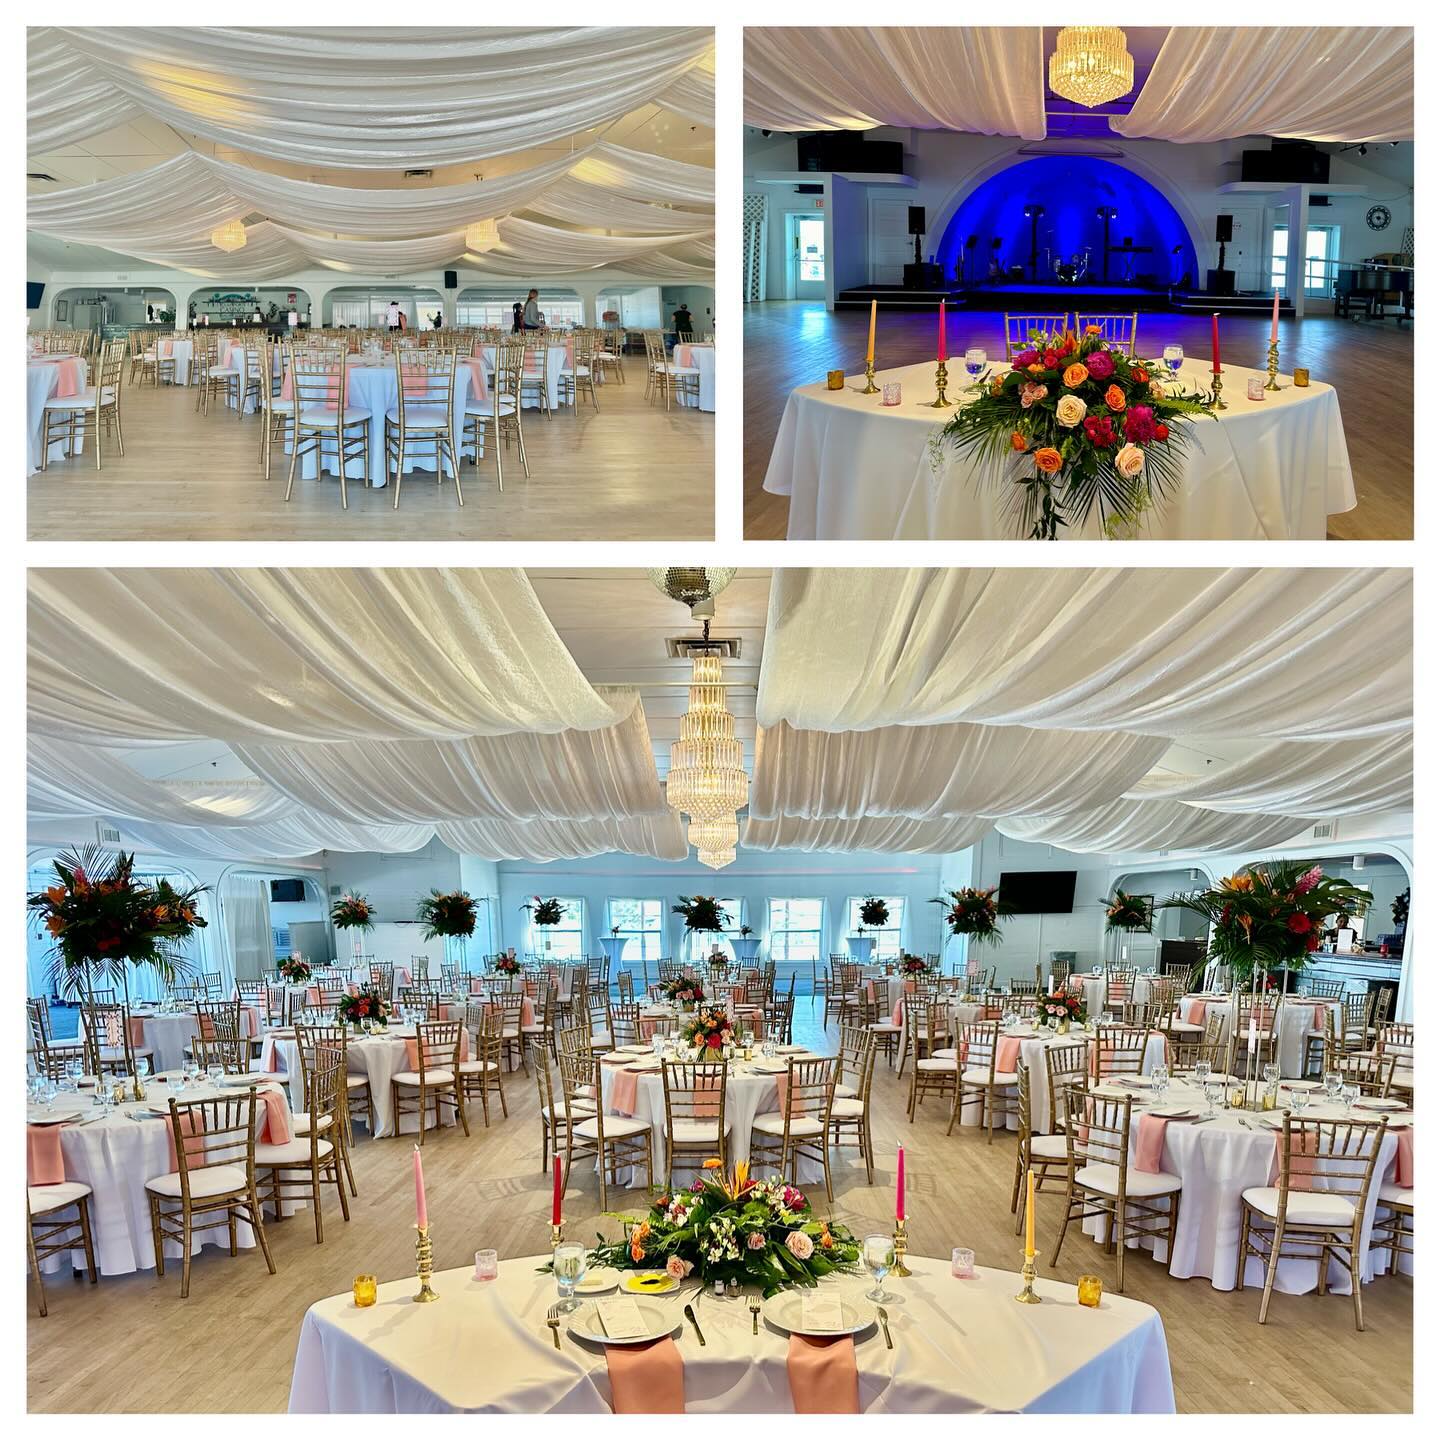 Love how this wedding turned out! We provided the Draped Ceiling Wave Panels, various Draped Areas, & The Vintage Love S